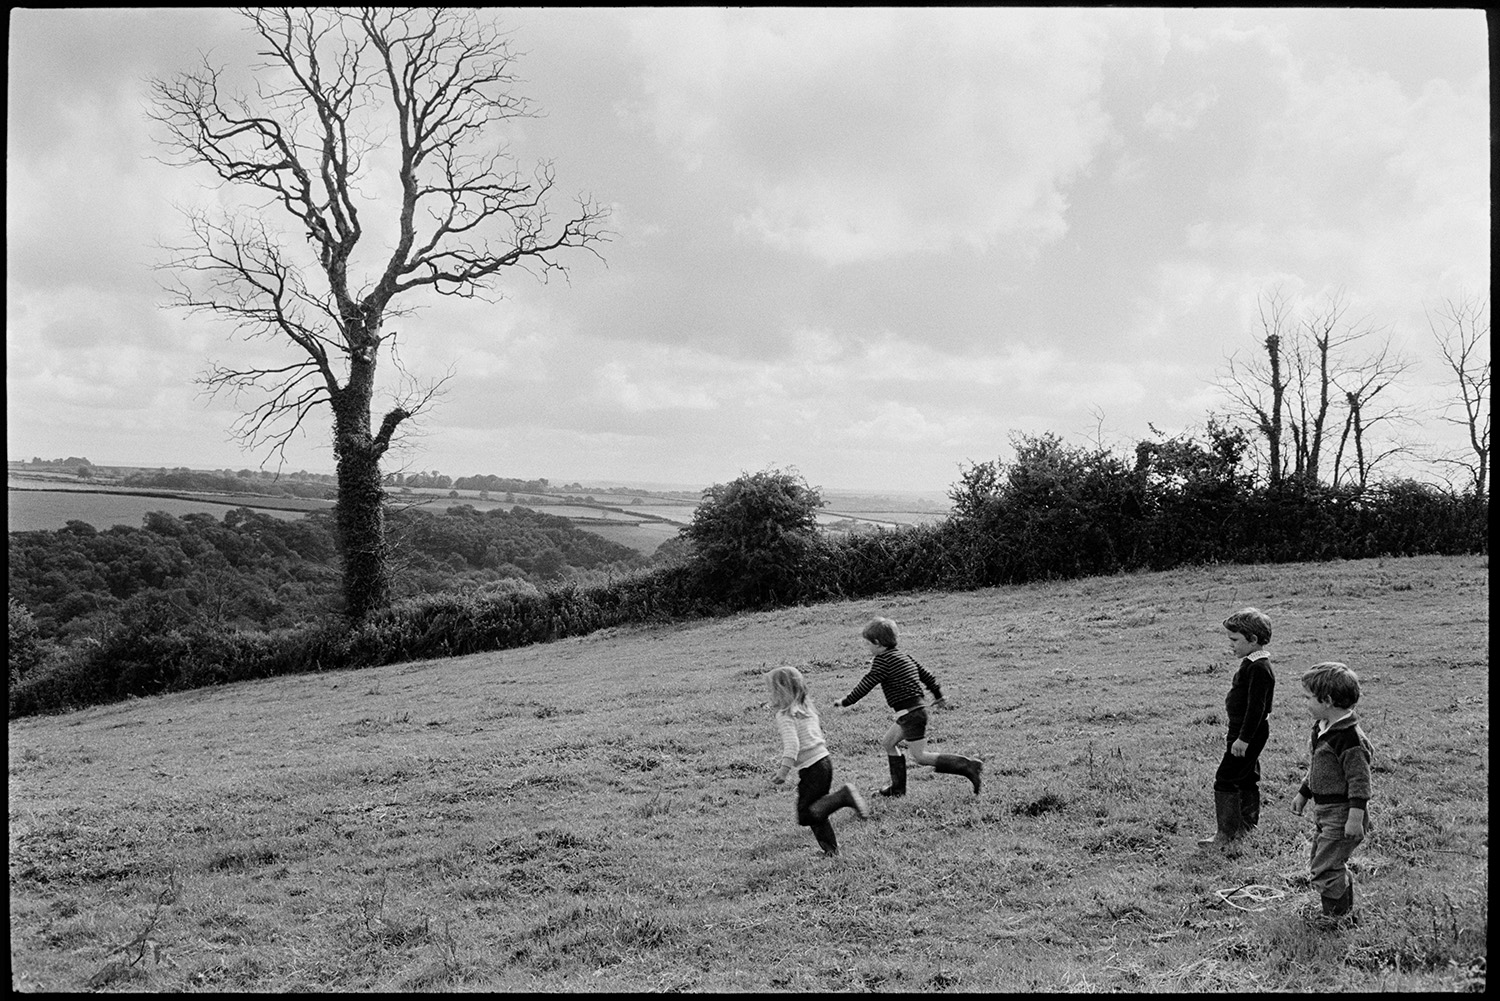 Children running in a field at Bondleigh. A dead elm tree can be seen in a hedgerow behind them, against a cloudy sky. Fields and woodland can be seen in the background.